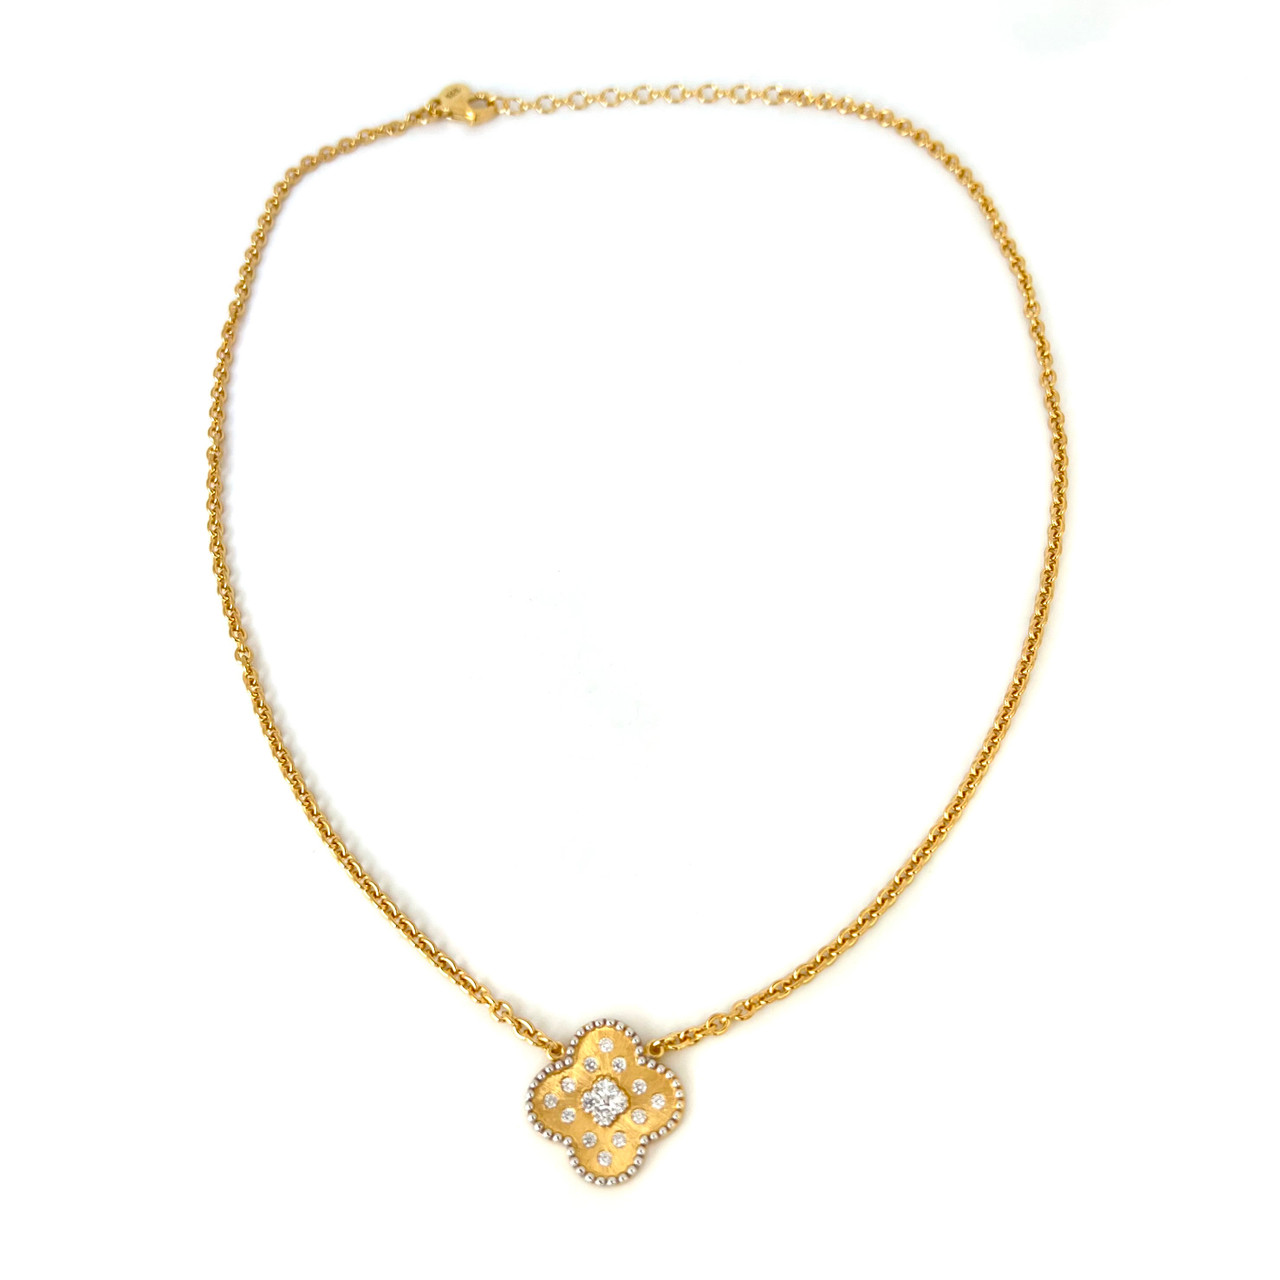 Vintage Four Leaf Clover Necklace With 20 Motifs, 18k Yellow Gold